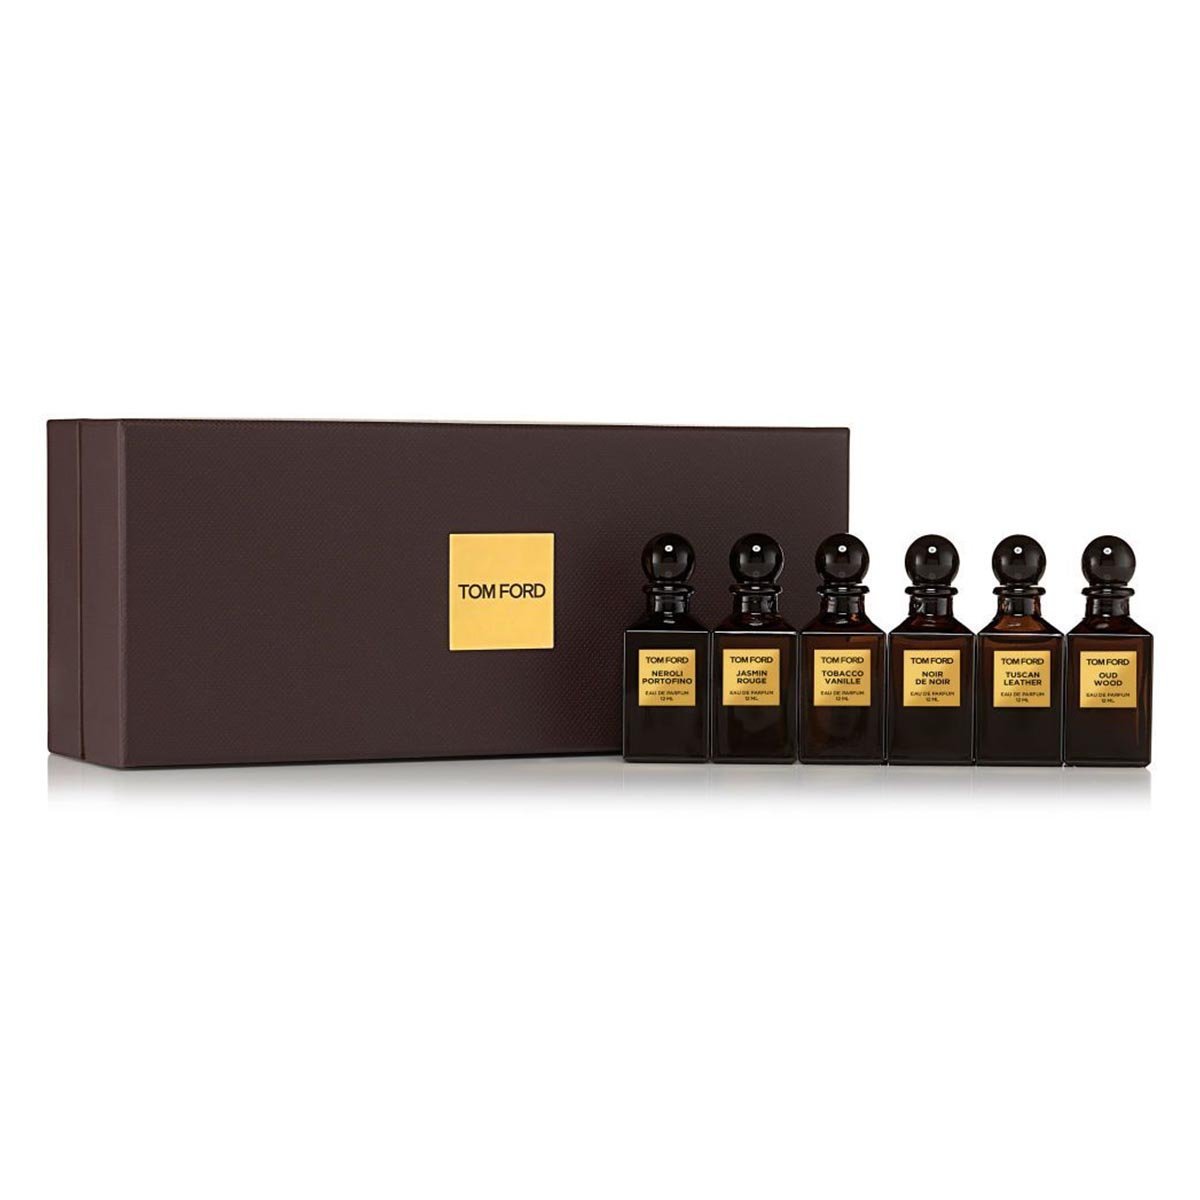 Tom Ford Private Label Collection Set - My Perfume Shop Australia